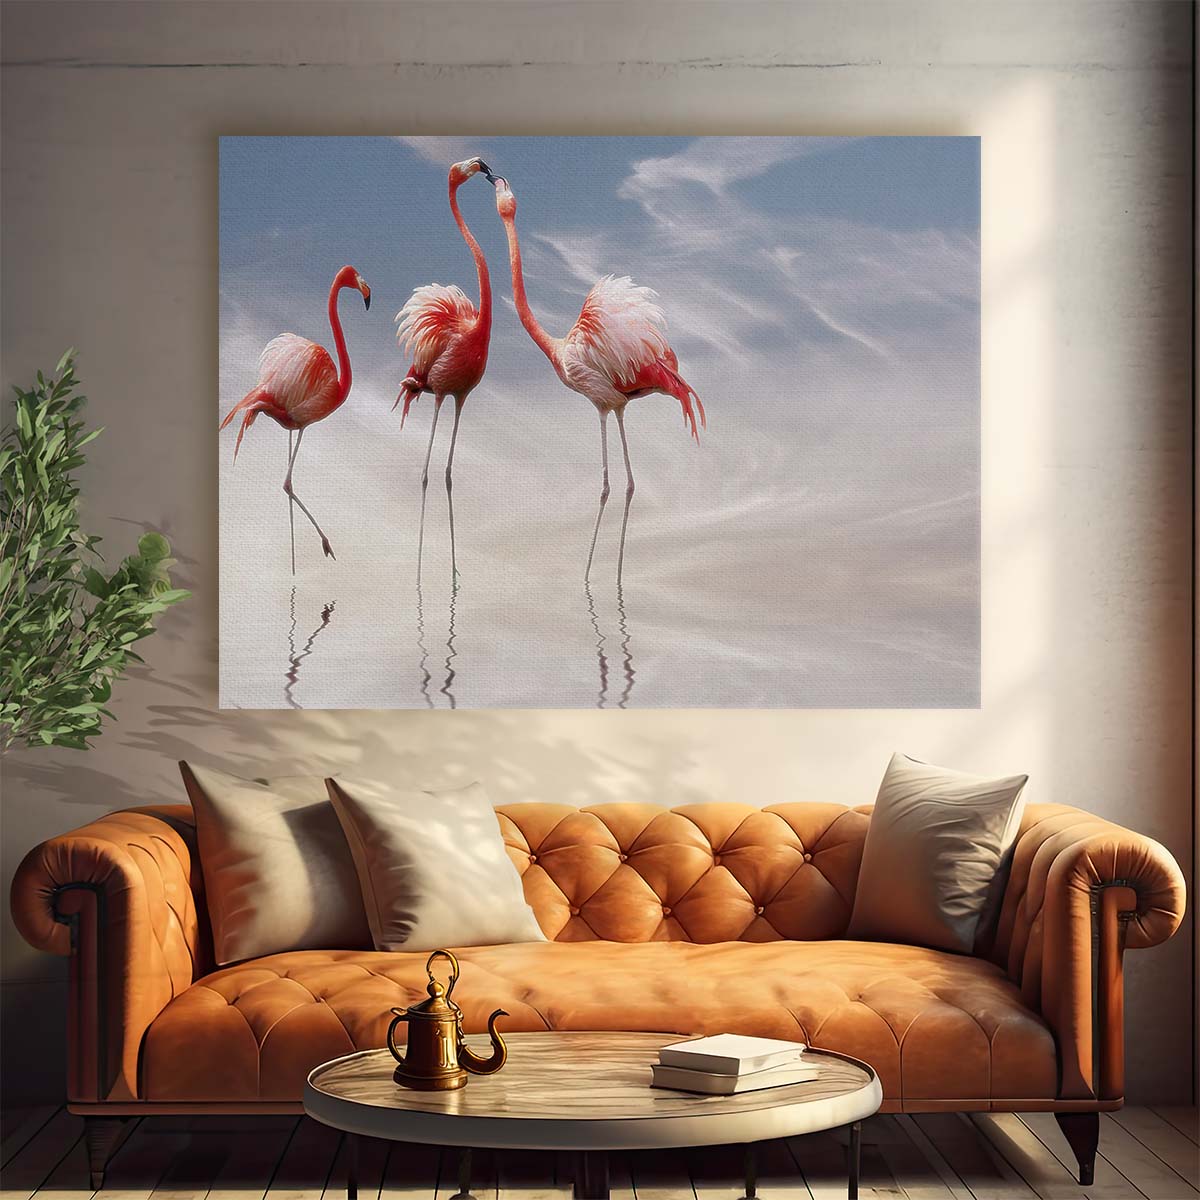 Romantic Flamingo Sunset Embrace Wall Art by Luxuriance Designs. Made in USA.